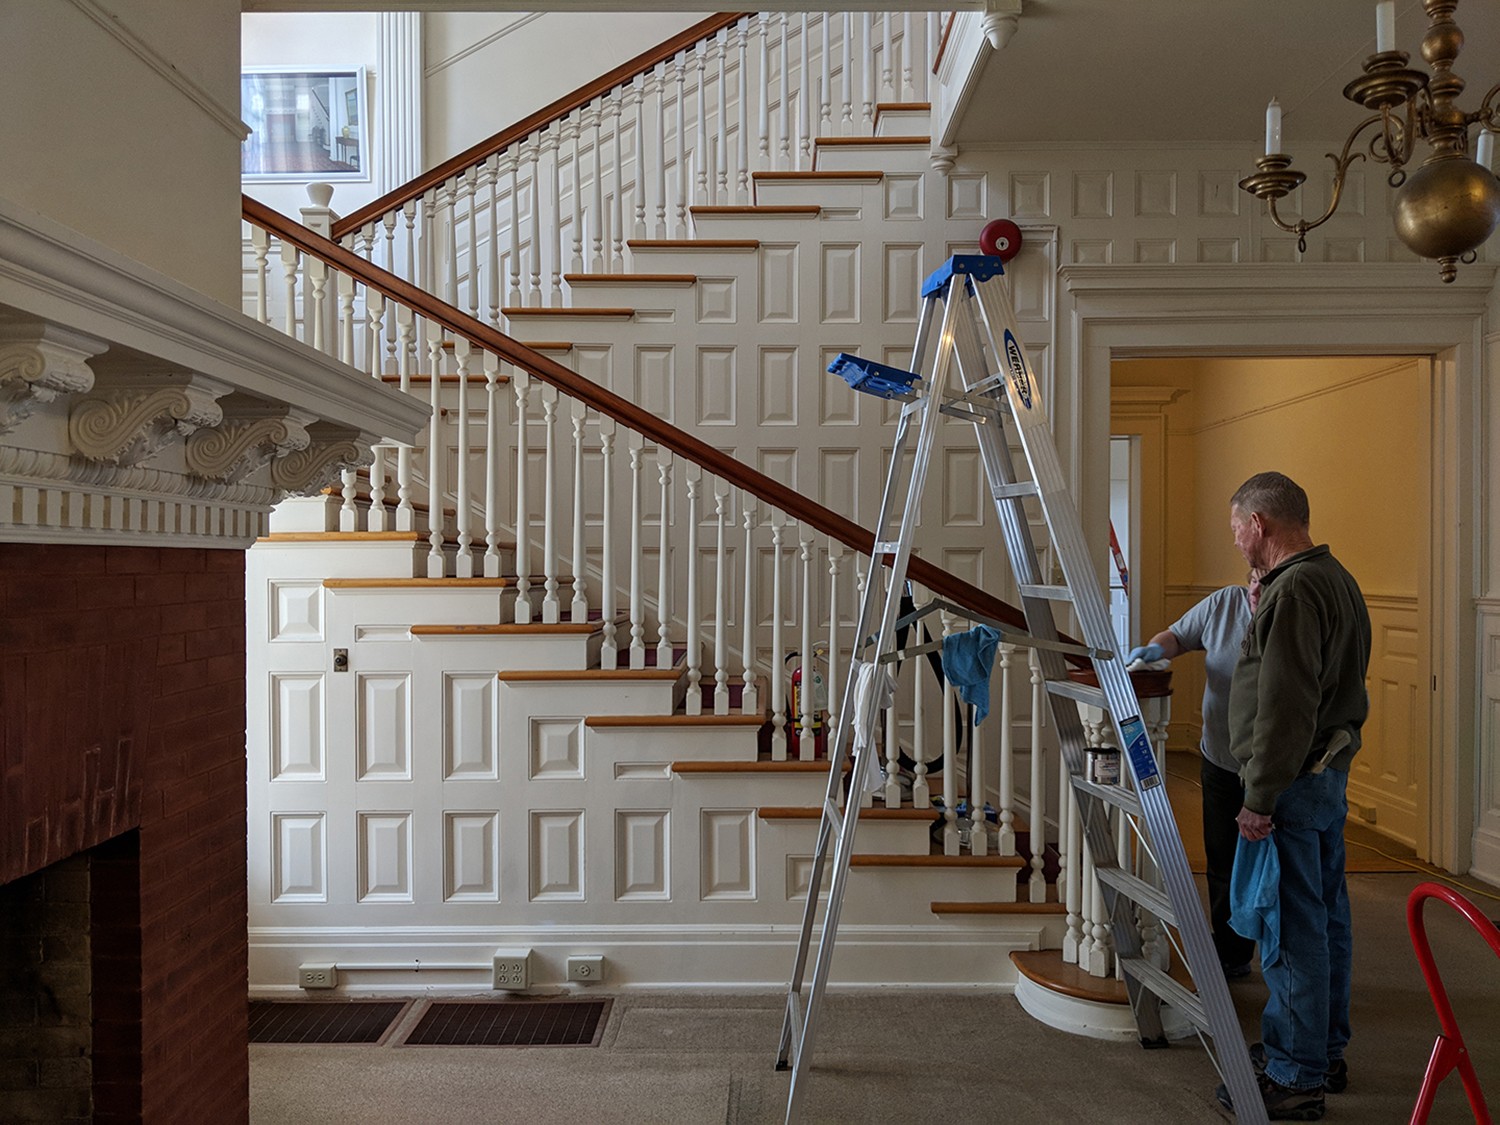 NPS staff clean the woodwork on the stairway at Flat Top Manor at Moses H. Cone Memorial Park.